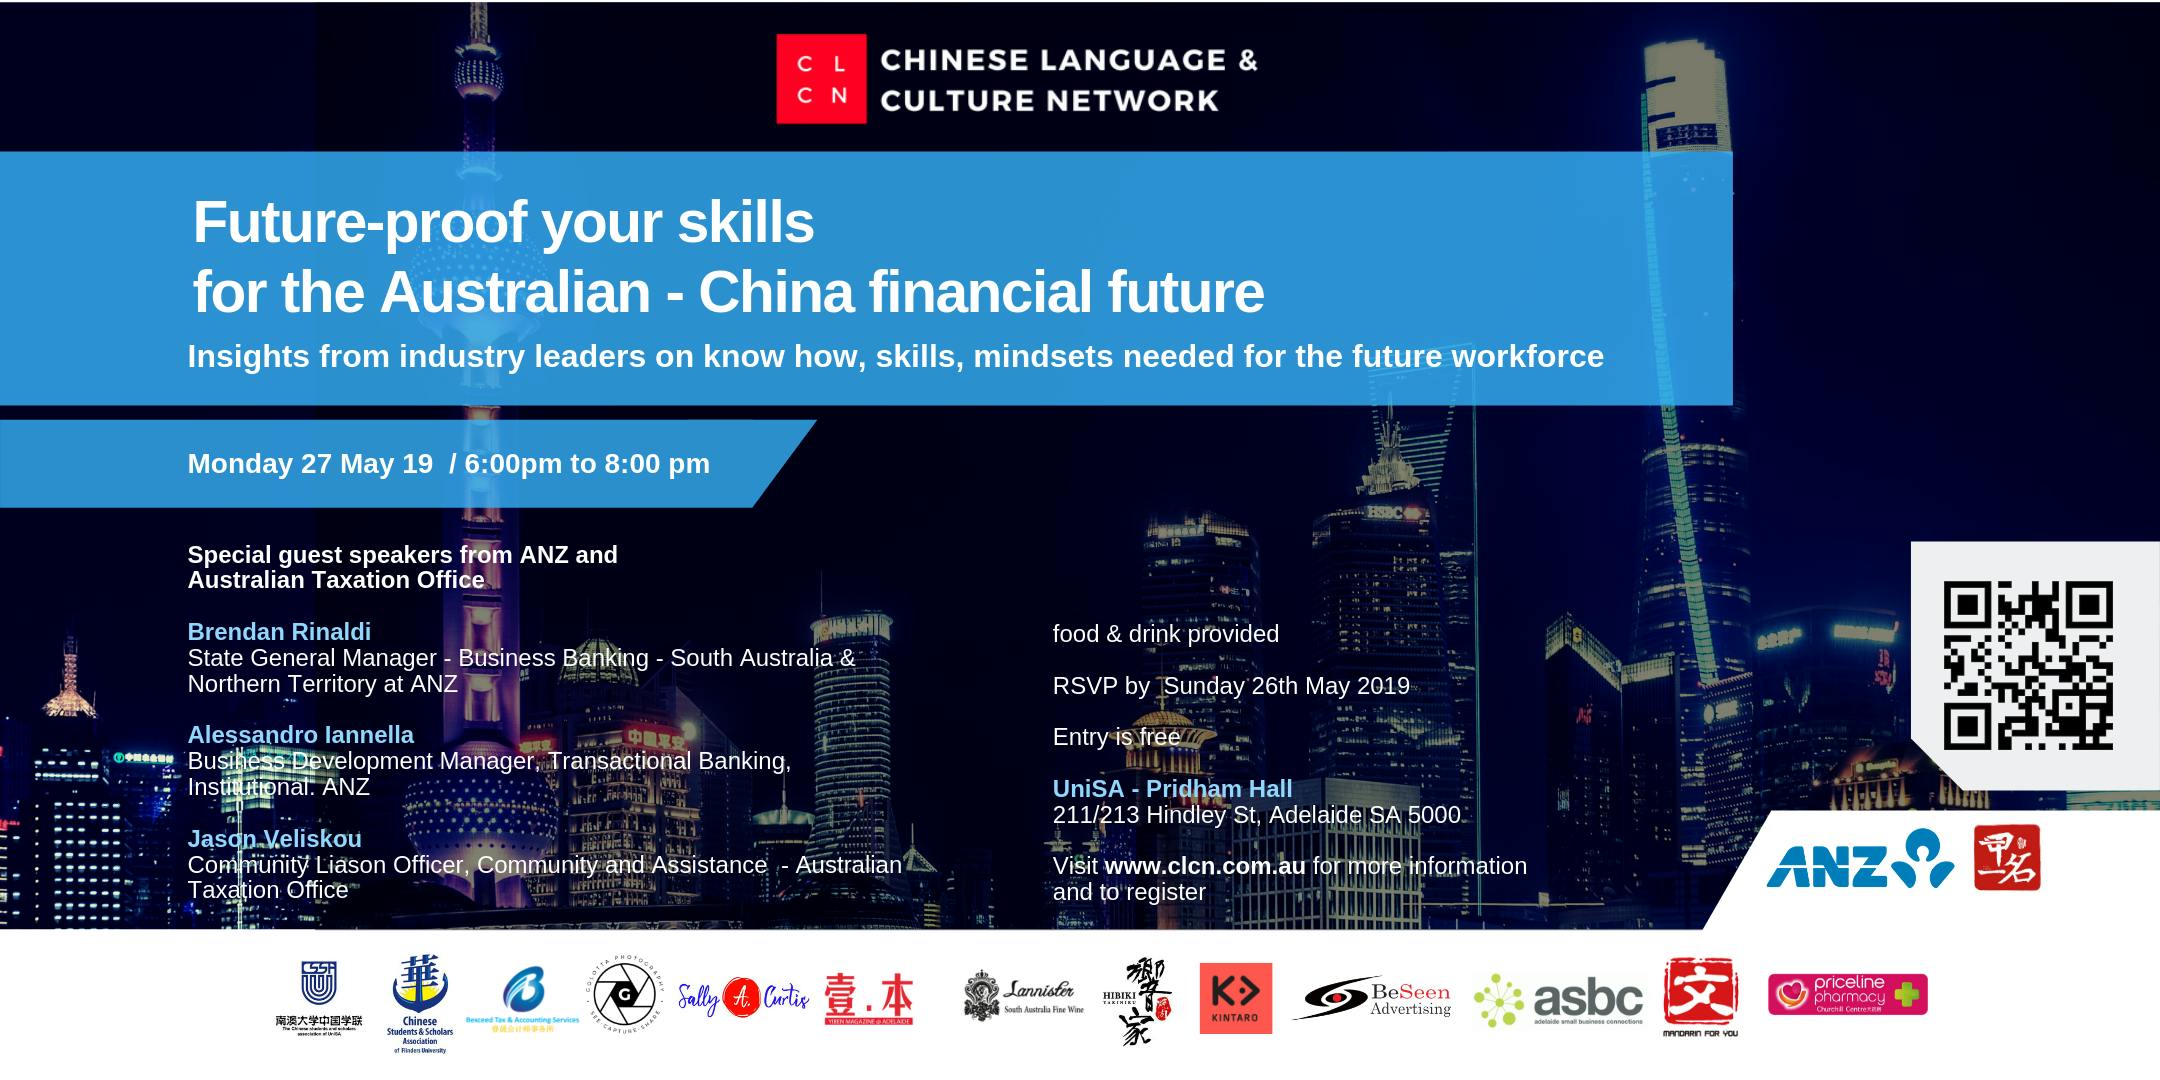 Future-proof your skills for the Australian - China financial future